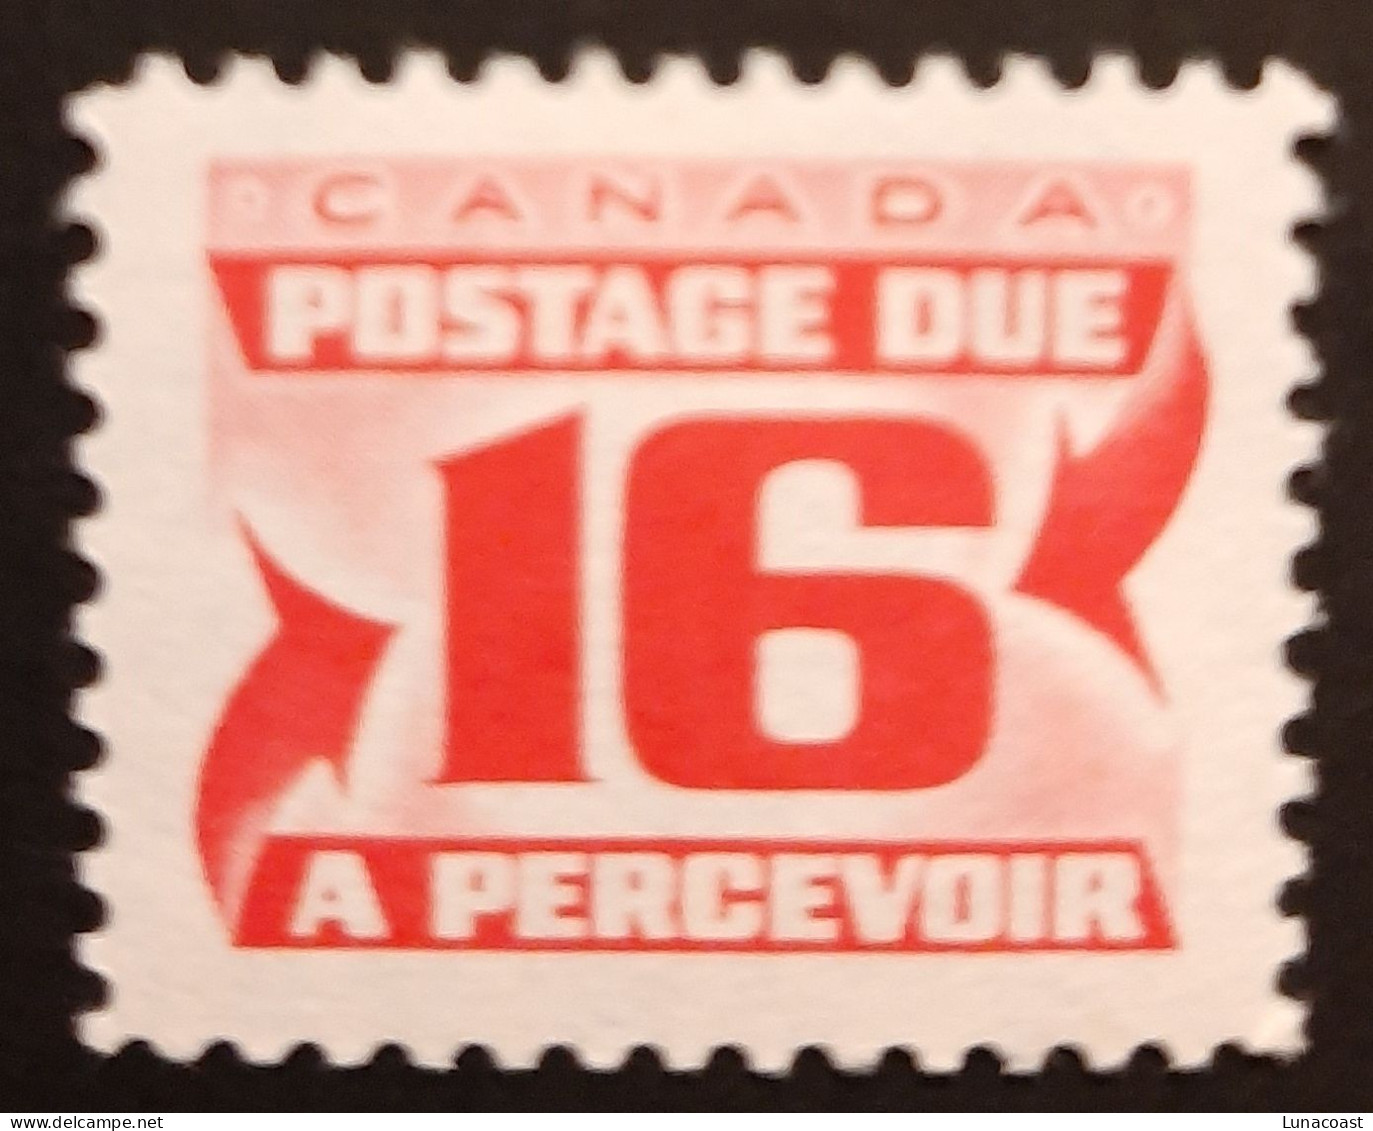 Canada 1973 MNH Sc #J37**   16c  Postage Due, Third Issue, Perf.12 - Neufs